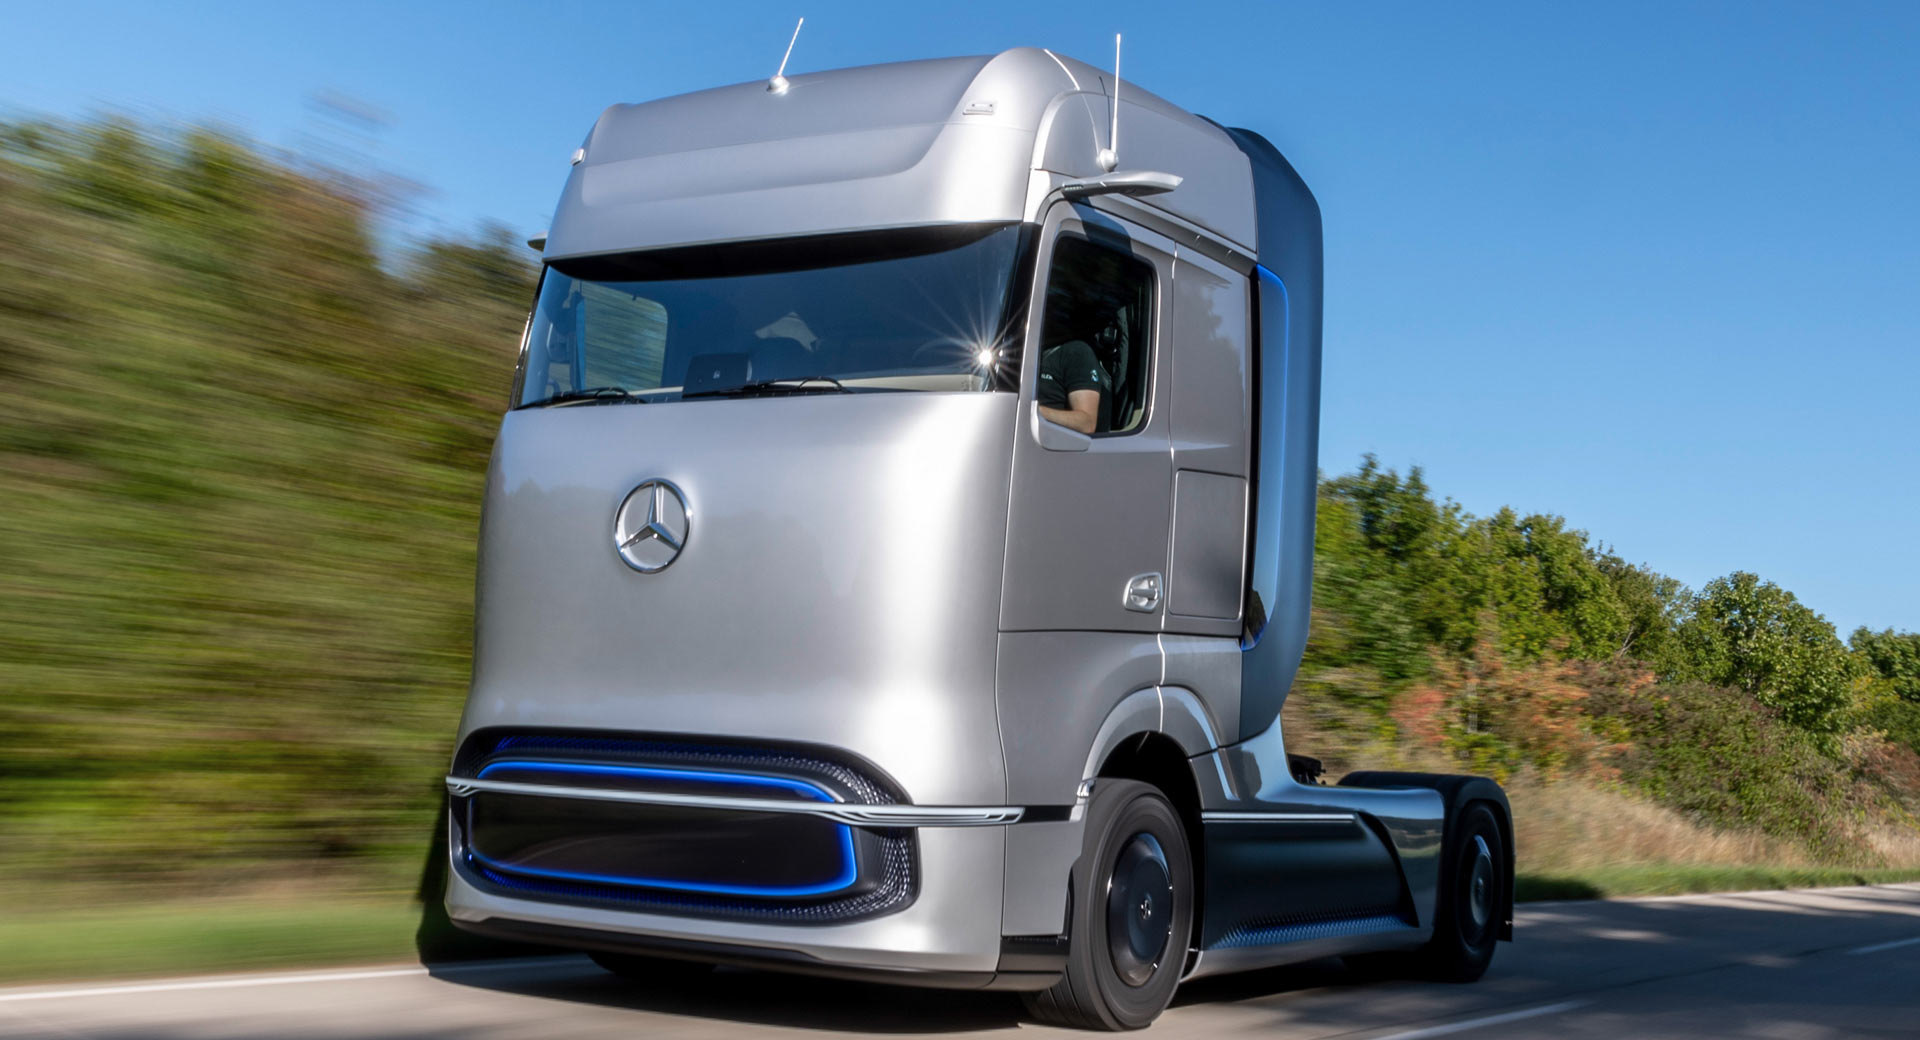 The new Mercedes-Benz GenH2 half-fuel cell prototype will soon appear